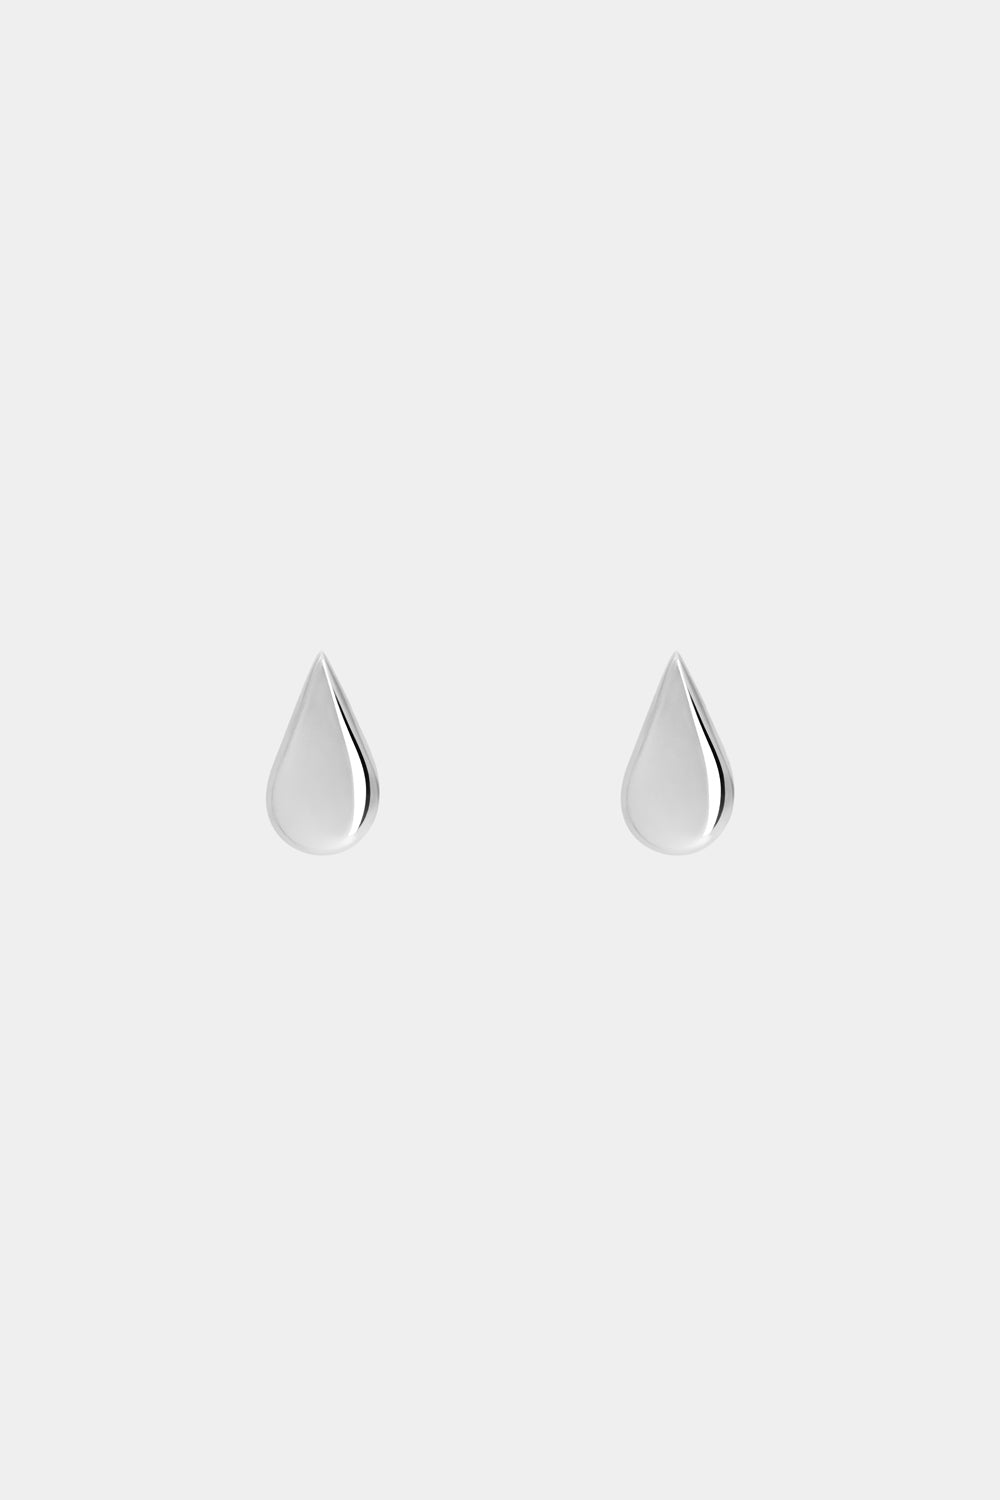 Pear Stud Earrings | Silver or 9K White Gold, More Options Available